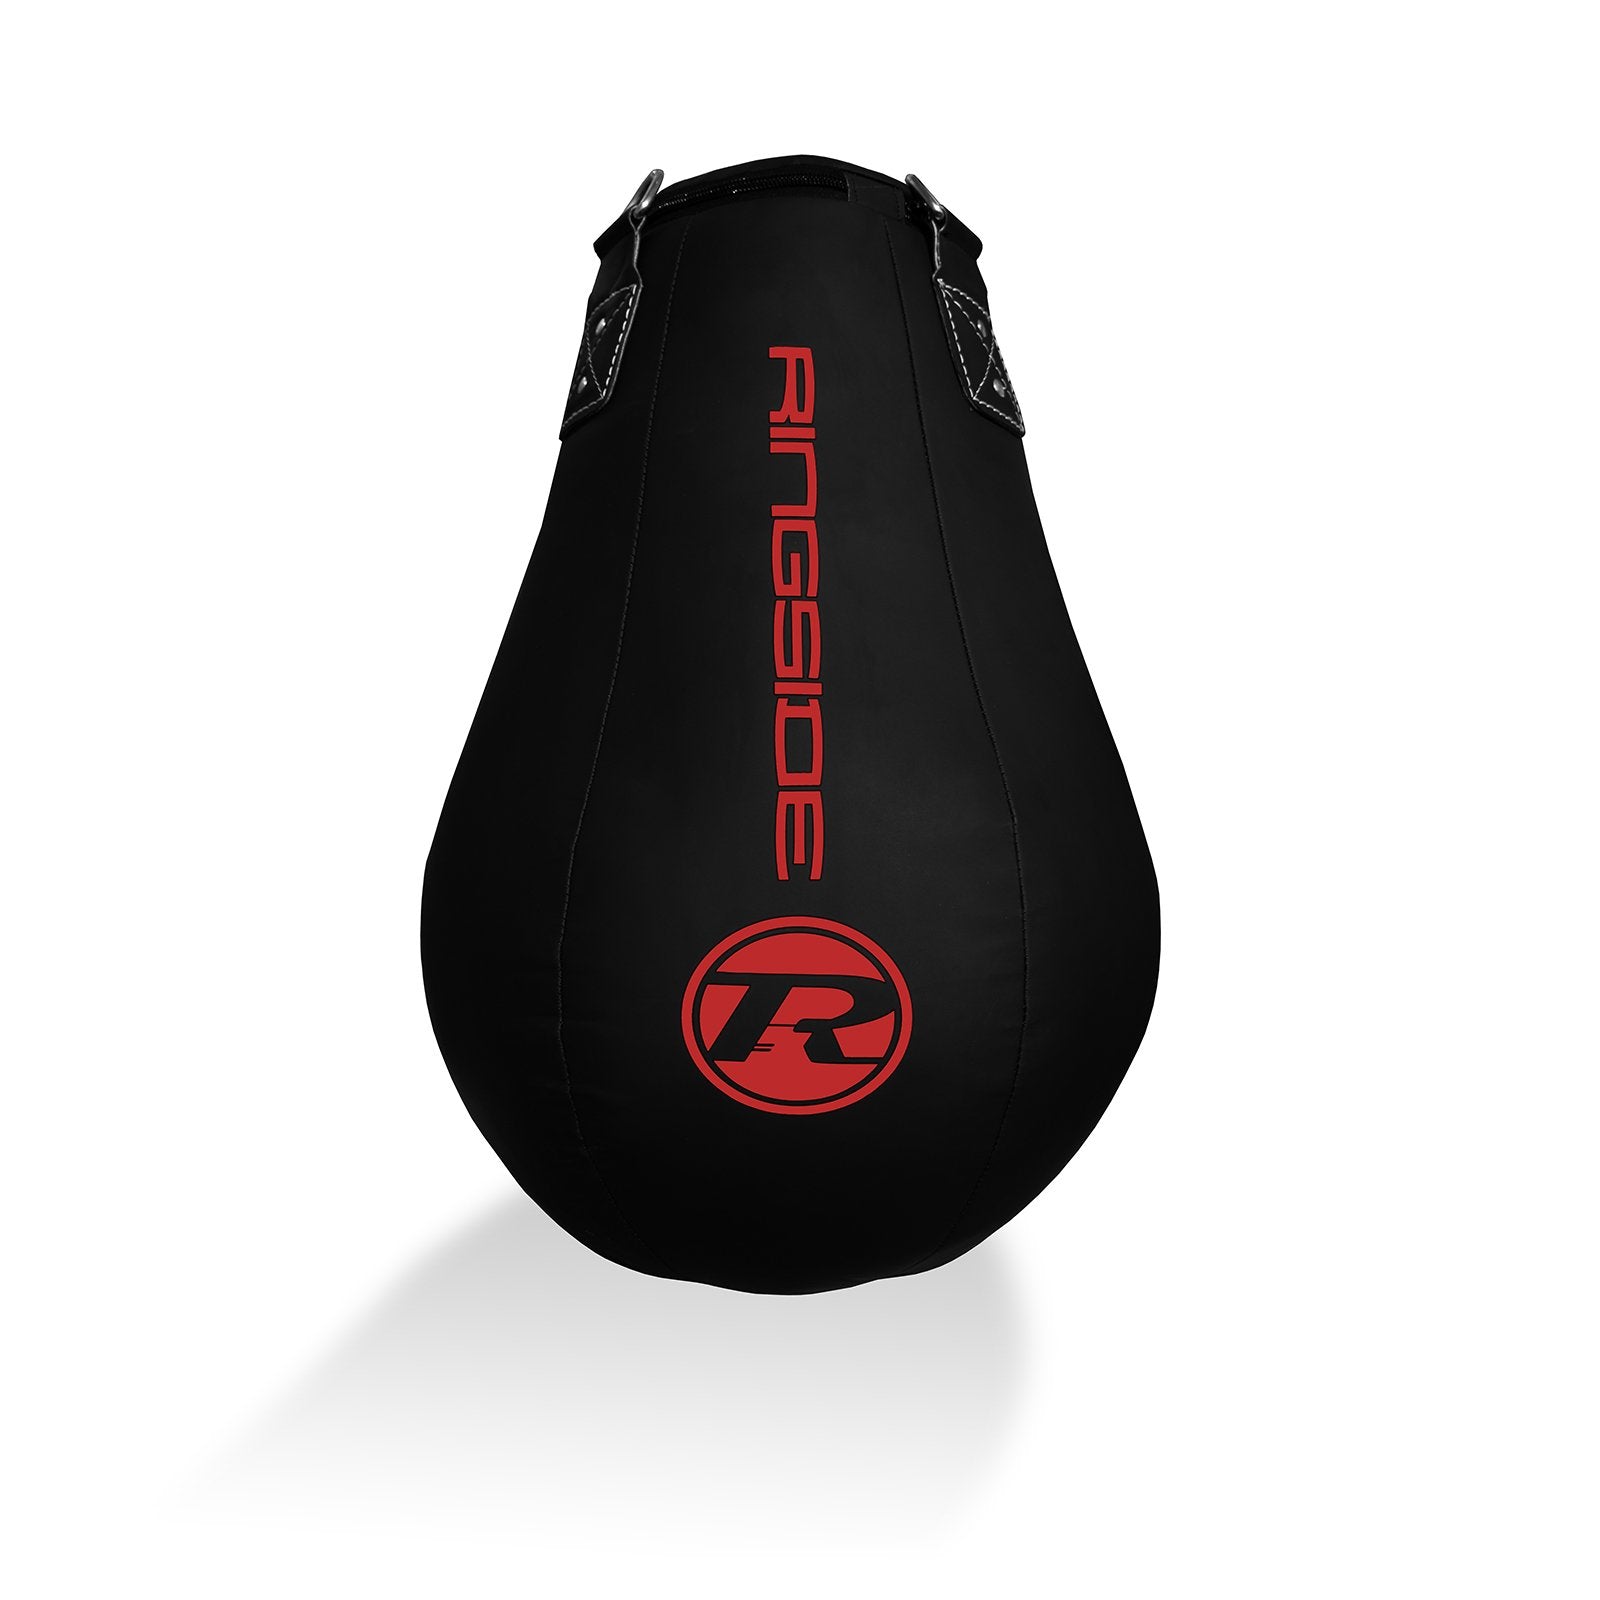 Synthetic Leather G1 Mirage Maize Punch Bag Black / Red